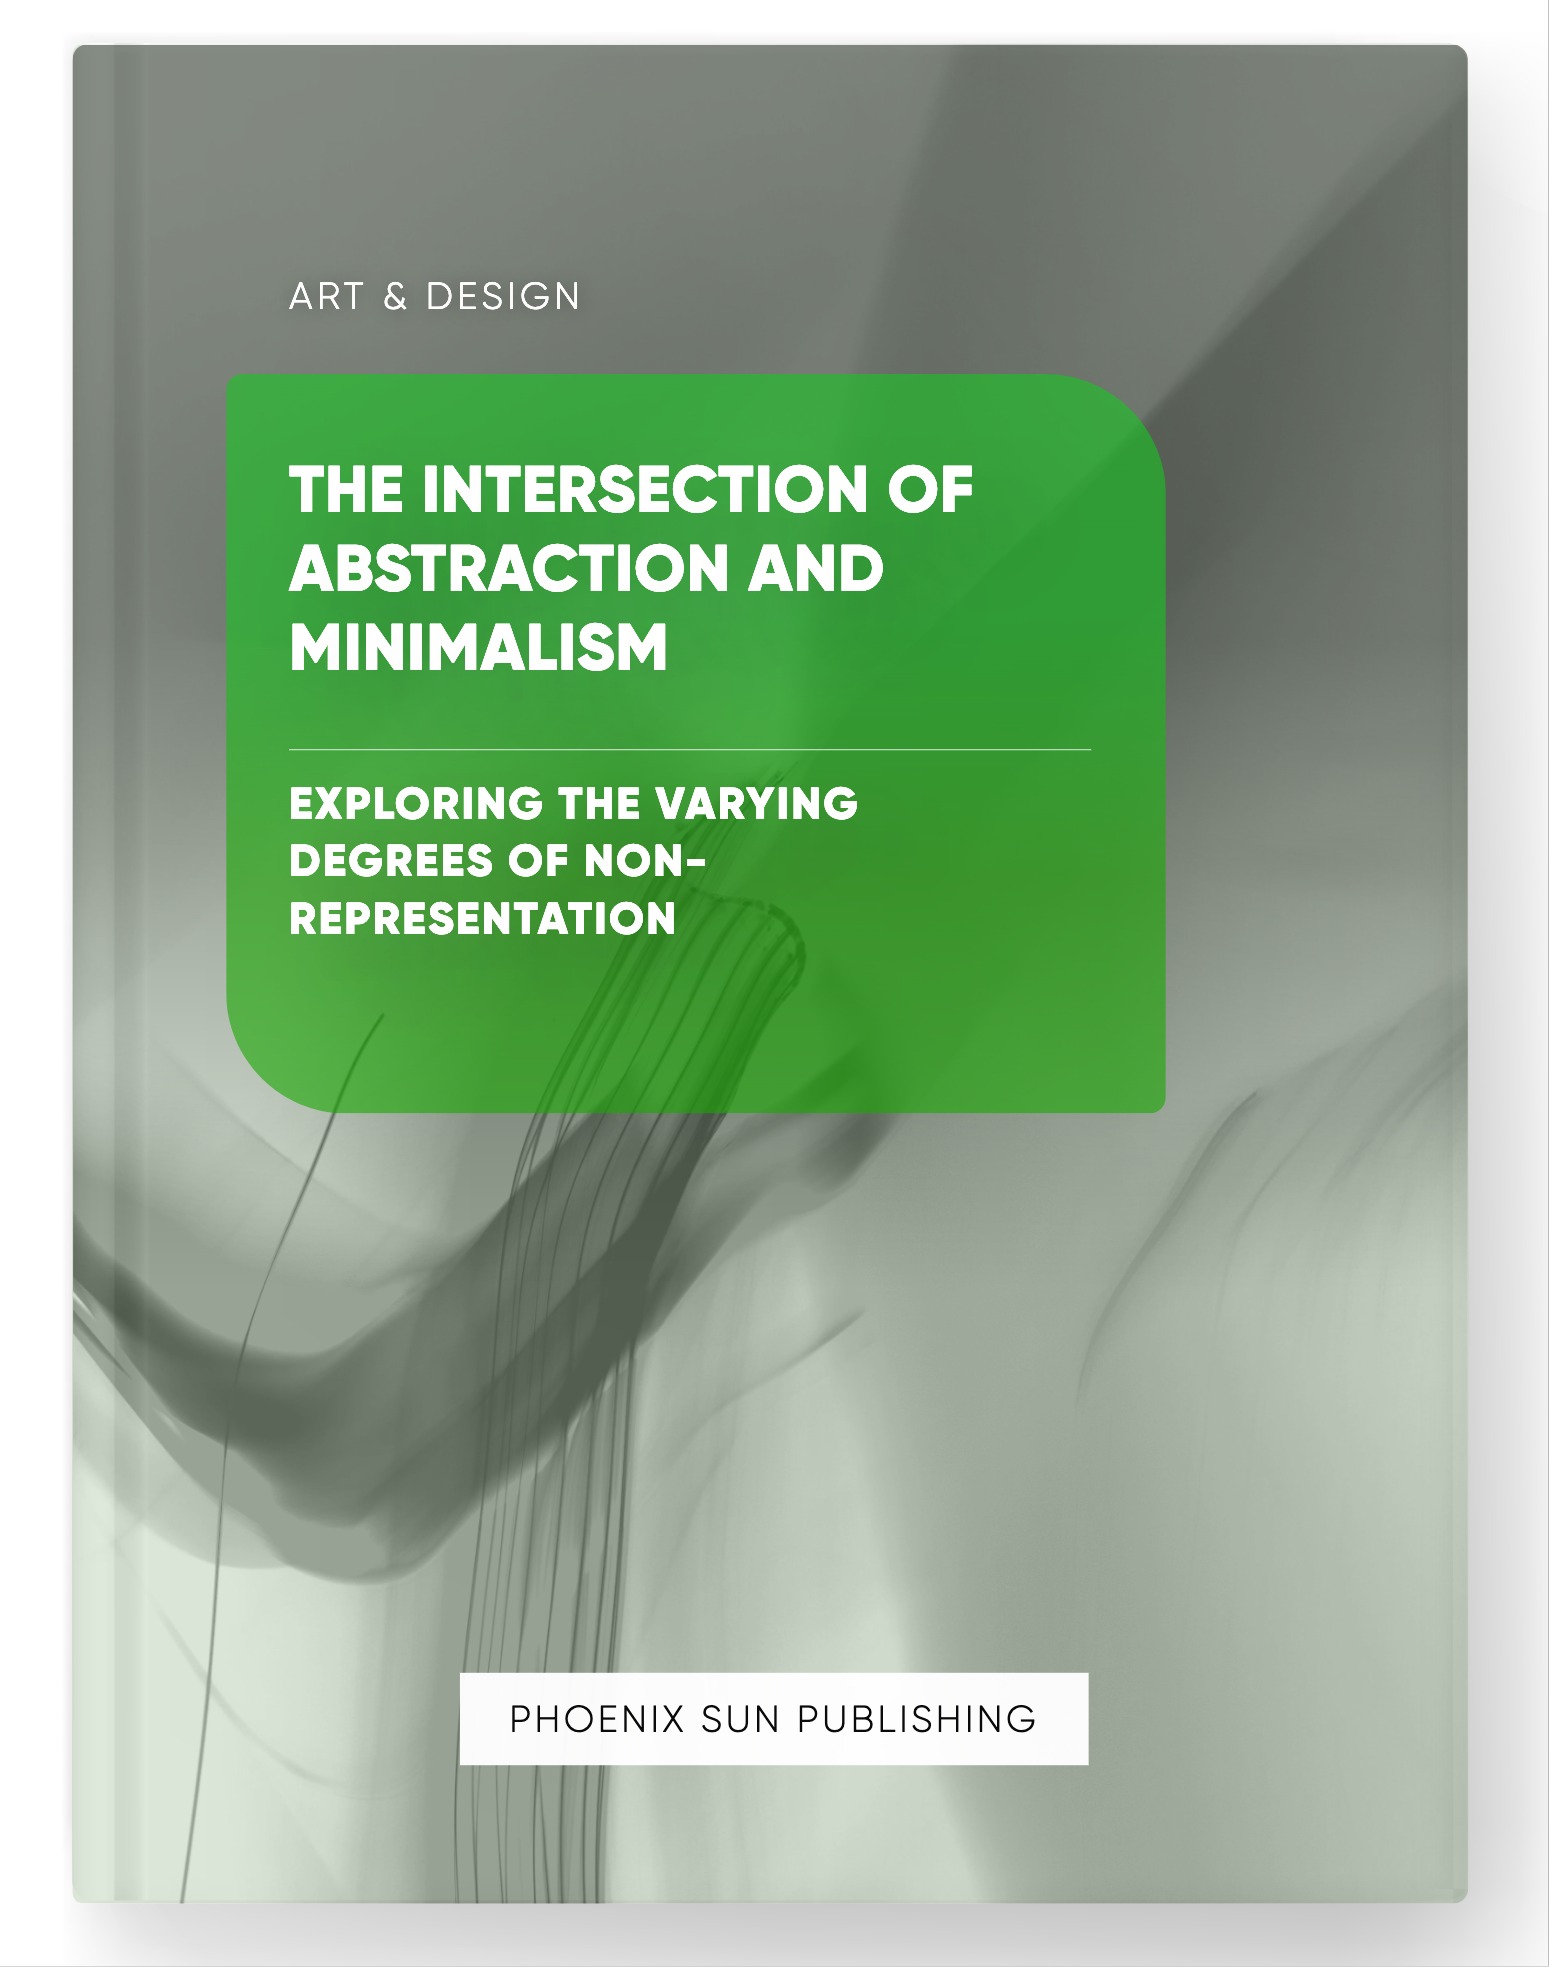 The Intersection of Abstraction and Minimalism – Exploring the Varying Degrees of Non-Representation